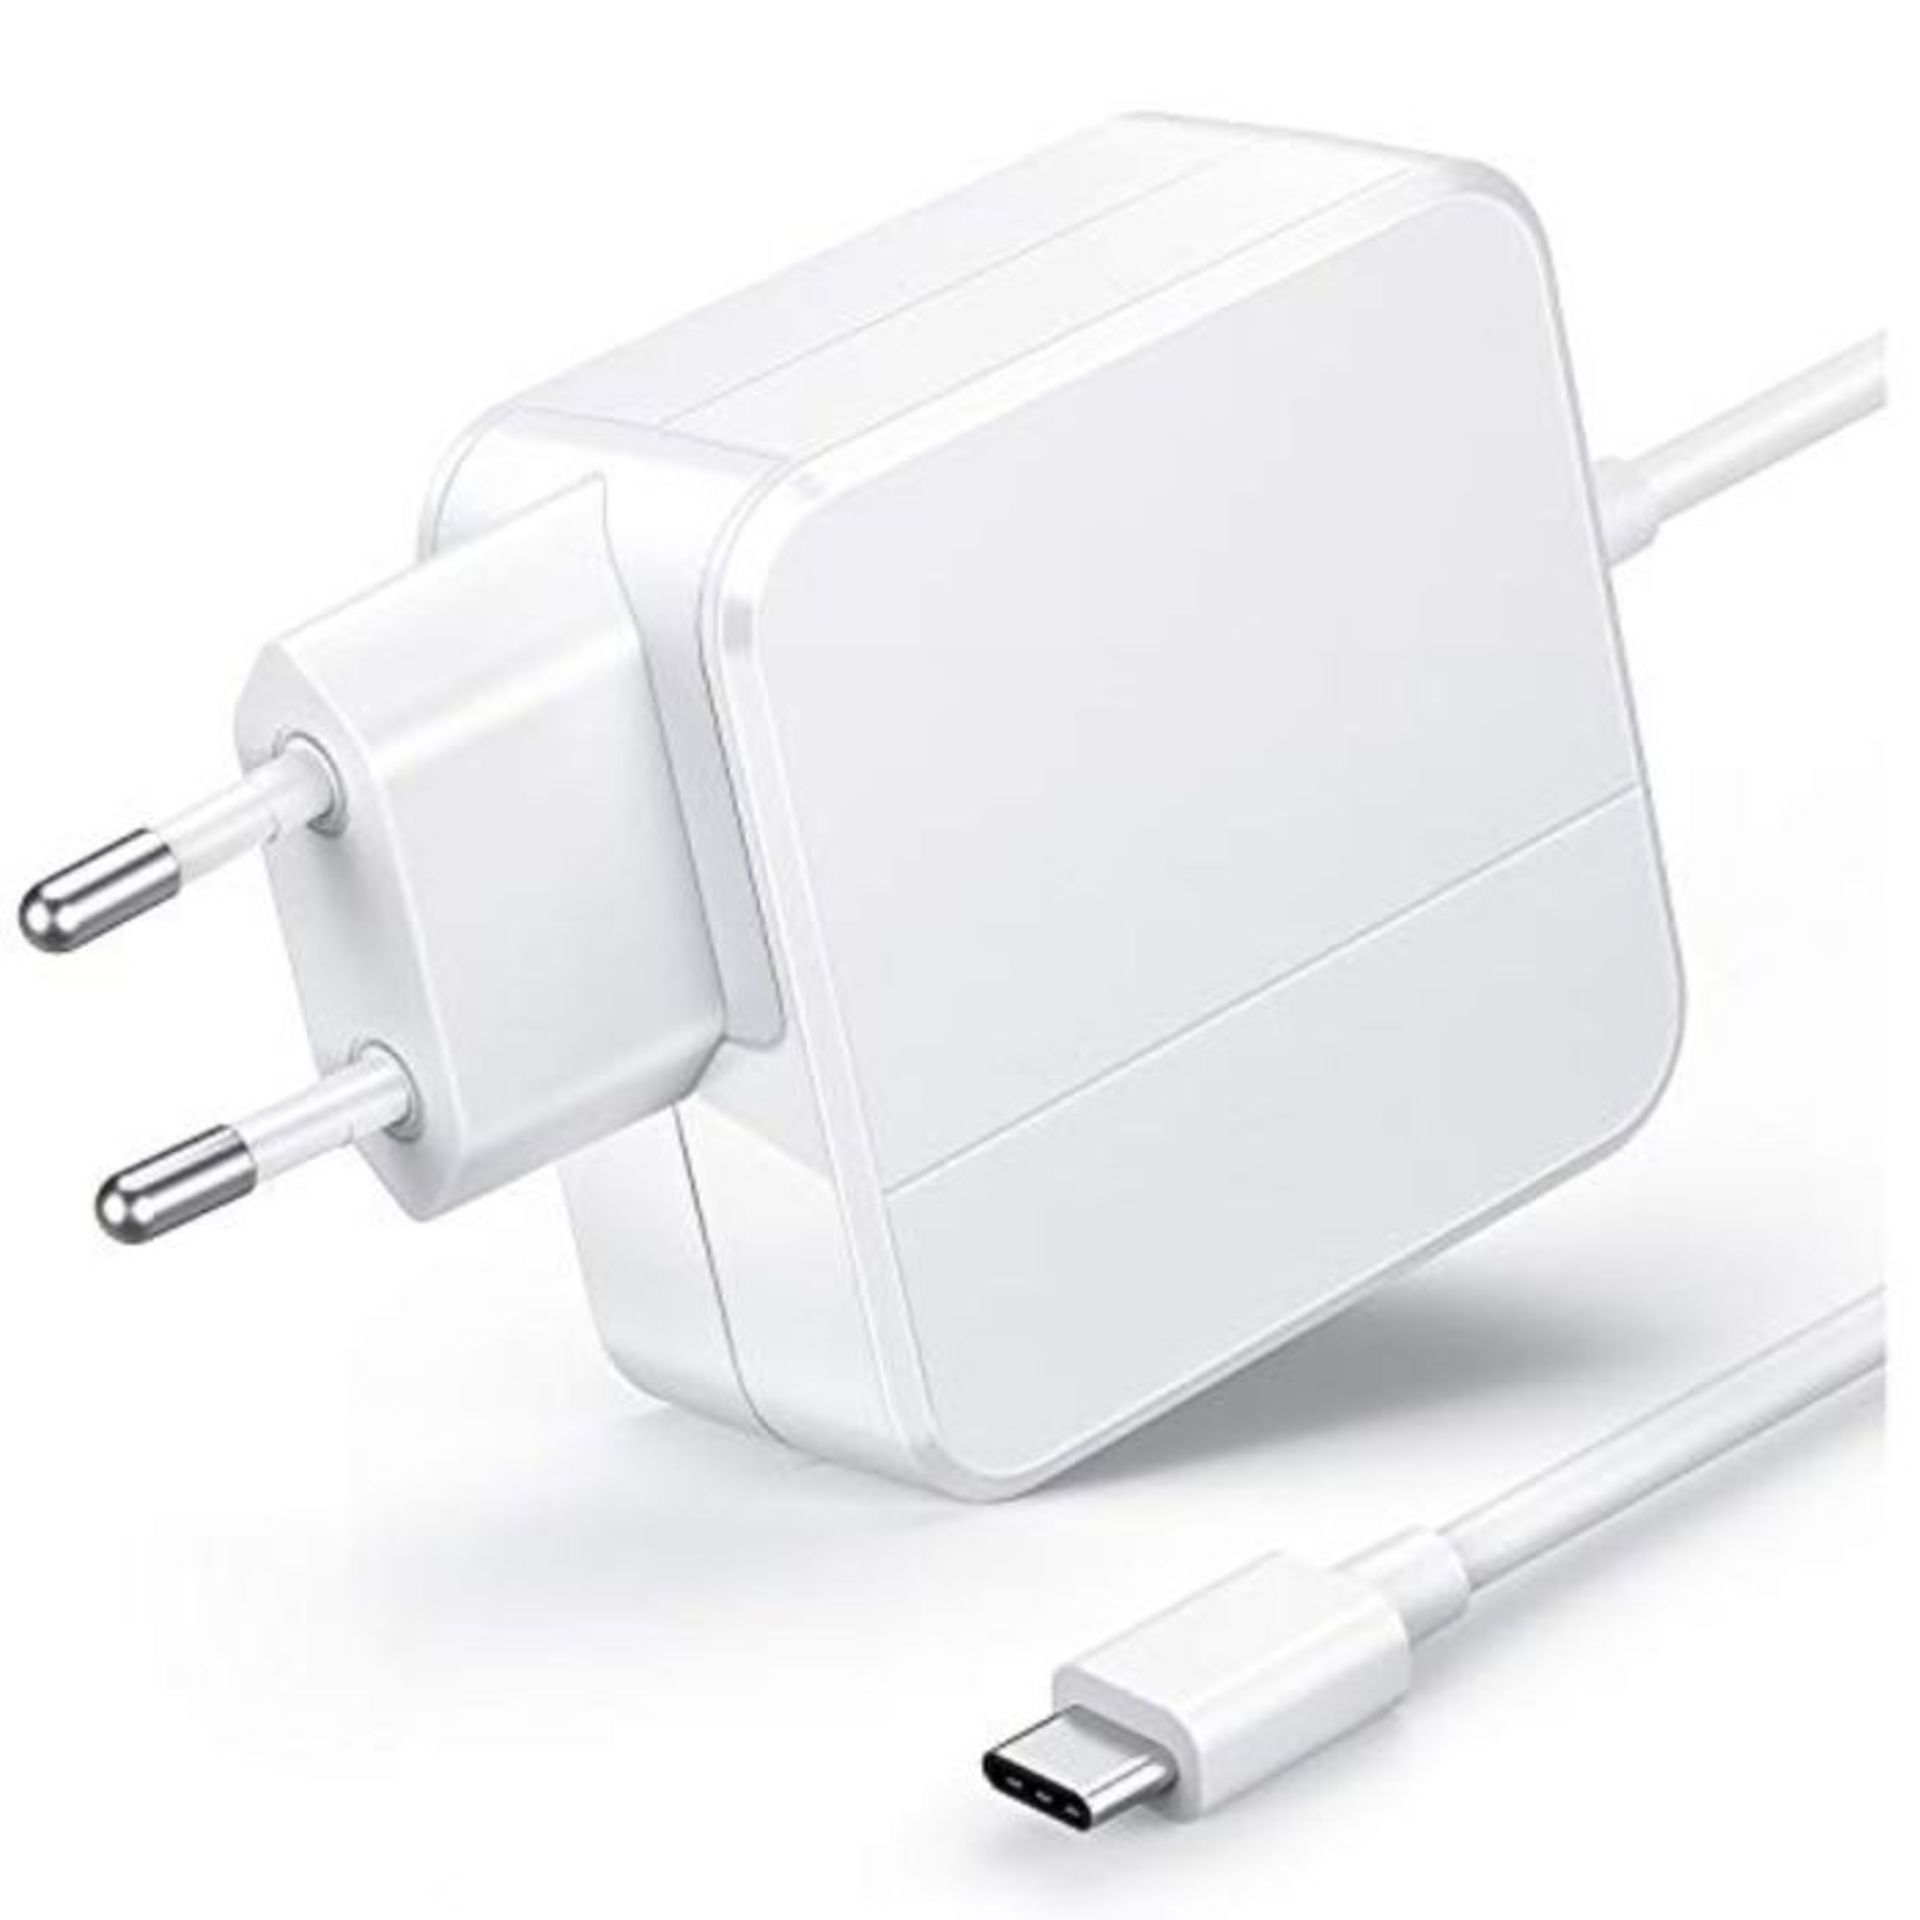 Blitzler 45 W USB C charger, compatible with iPad Pro 2018/2020, MacBook Pro 2019/2018